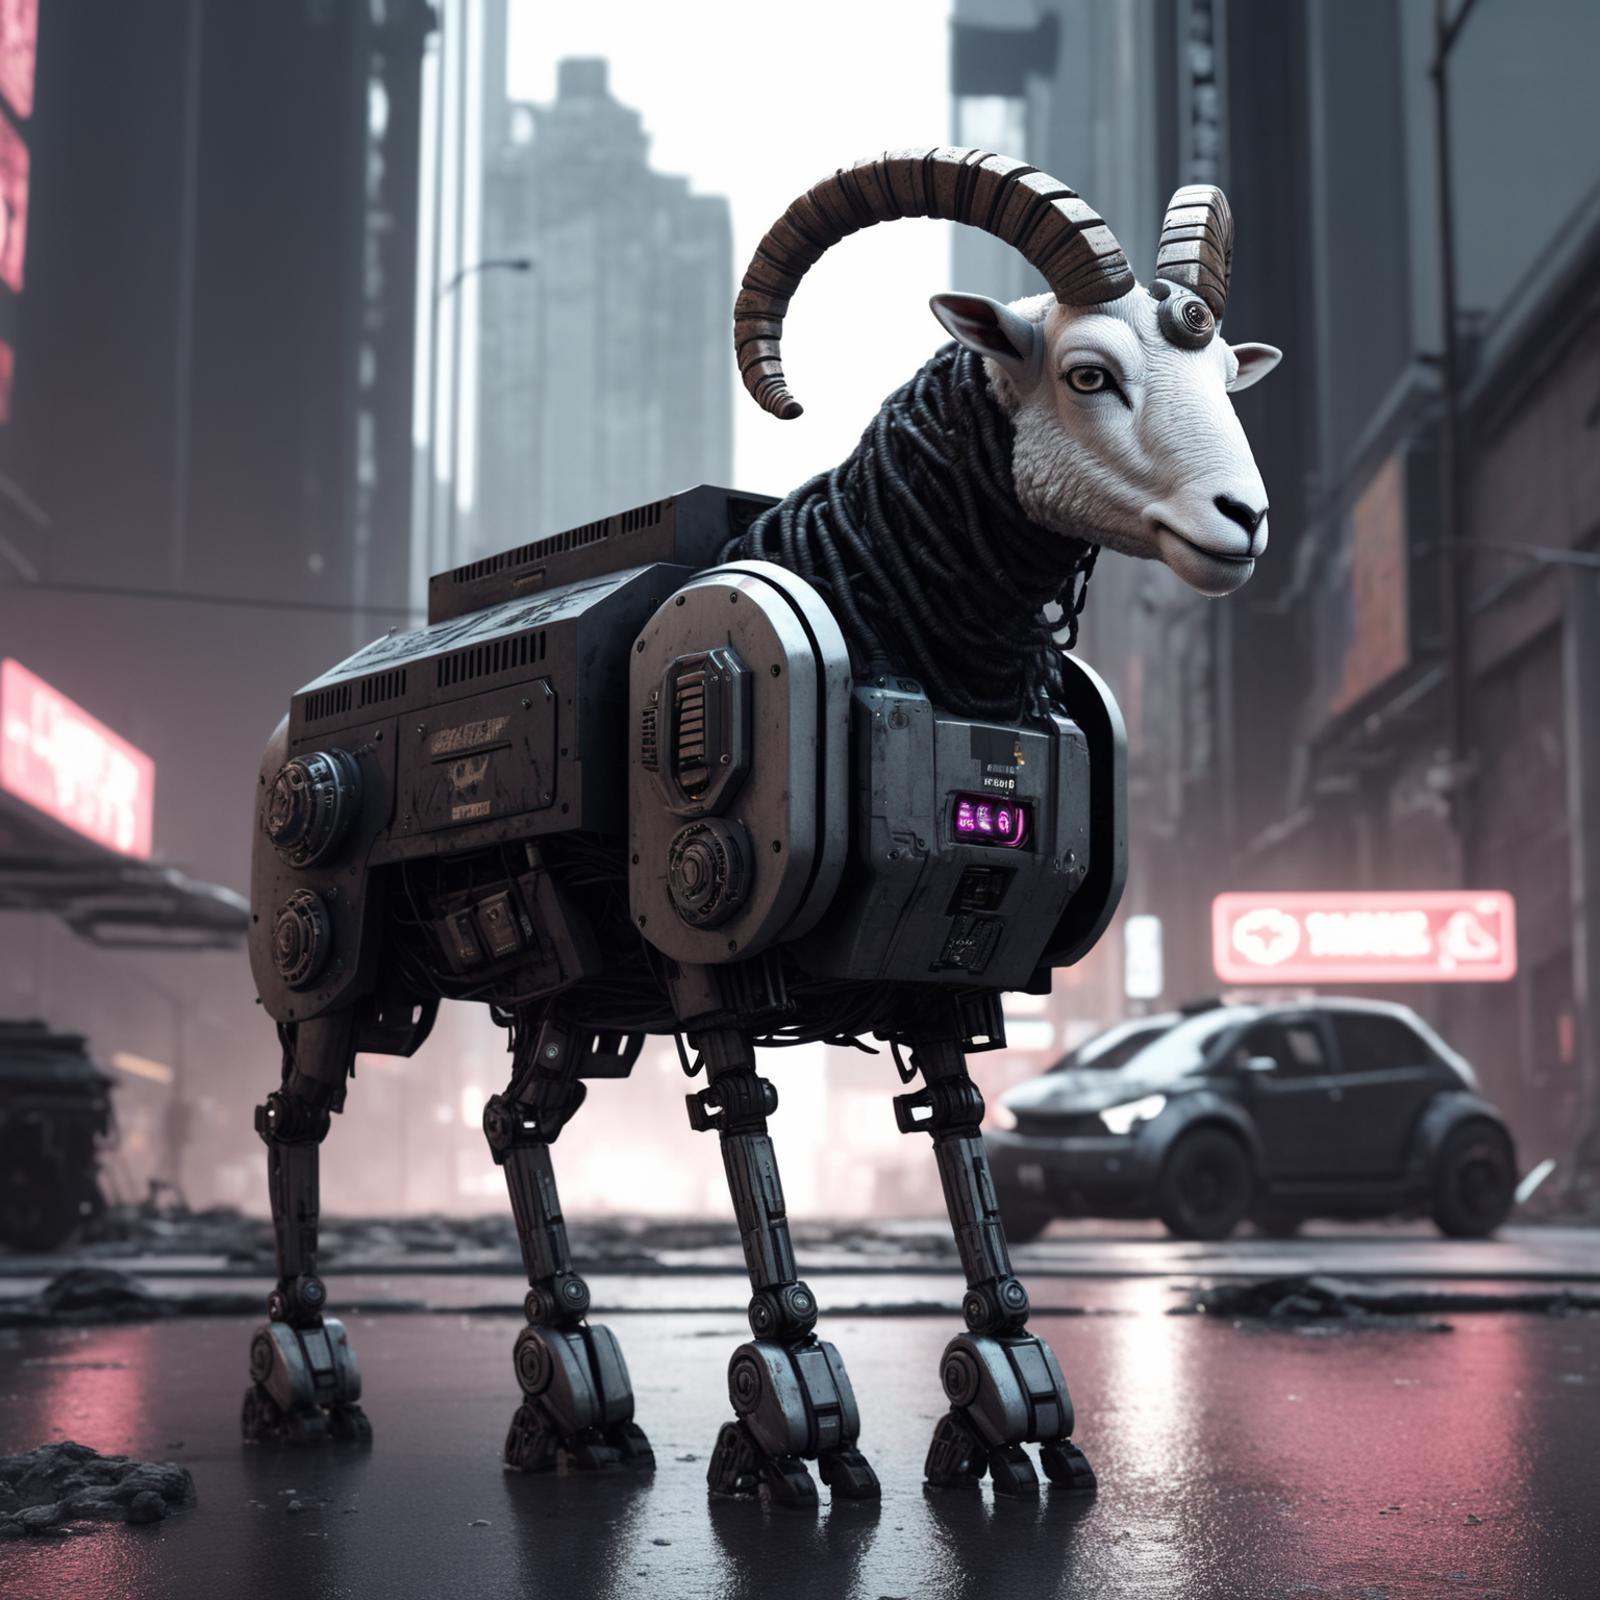 A robot-like goat or ram statue is standing on a city street, with the backdrop of a tall building.